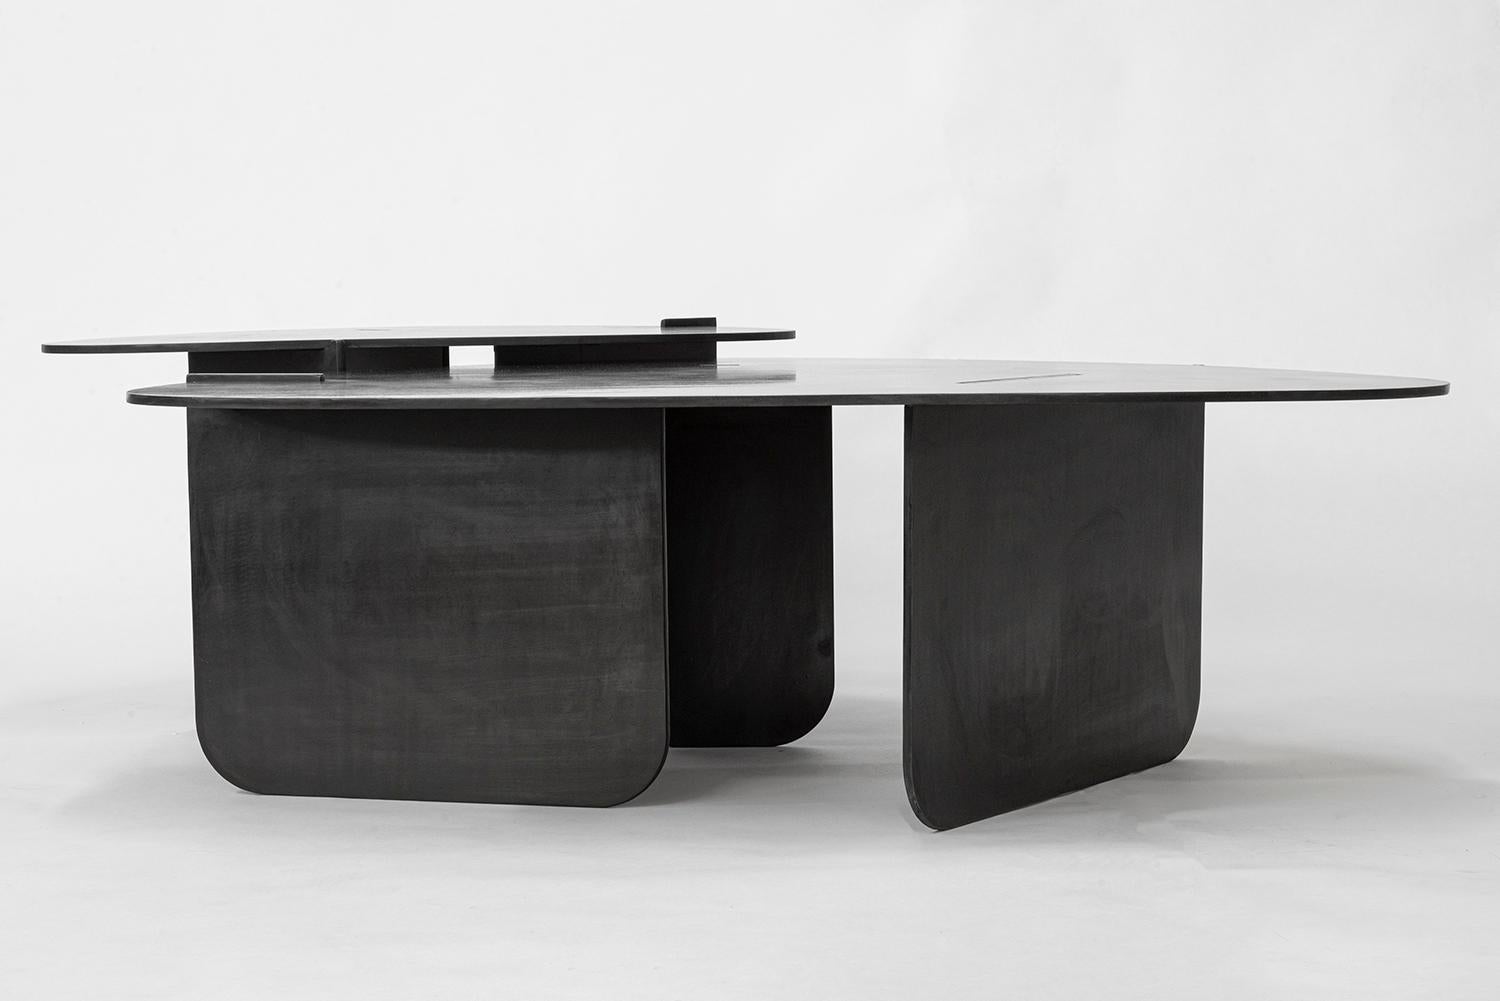 TABLE NO. 15 - NESTING SET
J.M. Szymanski
d. 2019

52'' D  36'' W  13'' H  - COFFEE  
32'' D  22'' W  15'' H - SIDE

This Noguchi-inspired coffee tables are handcrafted in 3/8” thick steel, with a natural black patina and wax finish, to create an